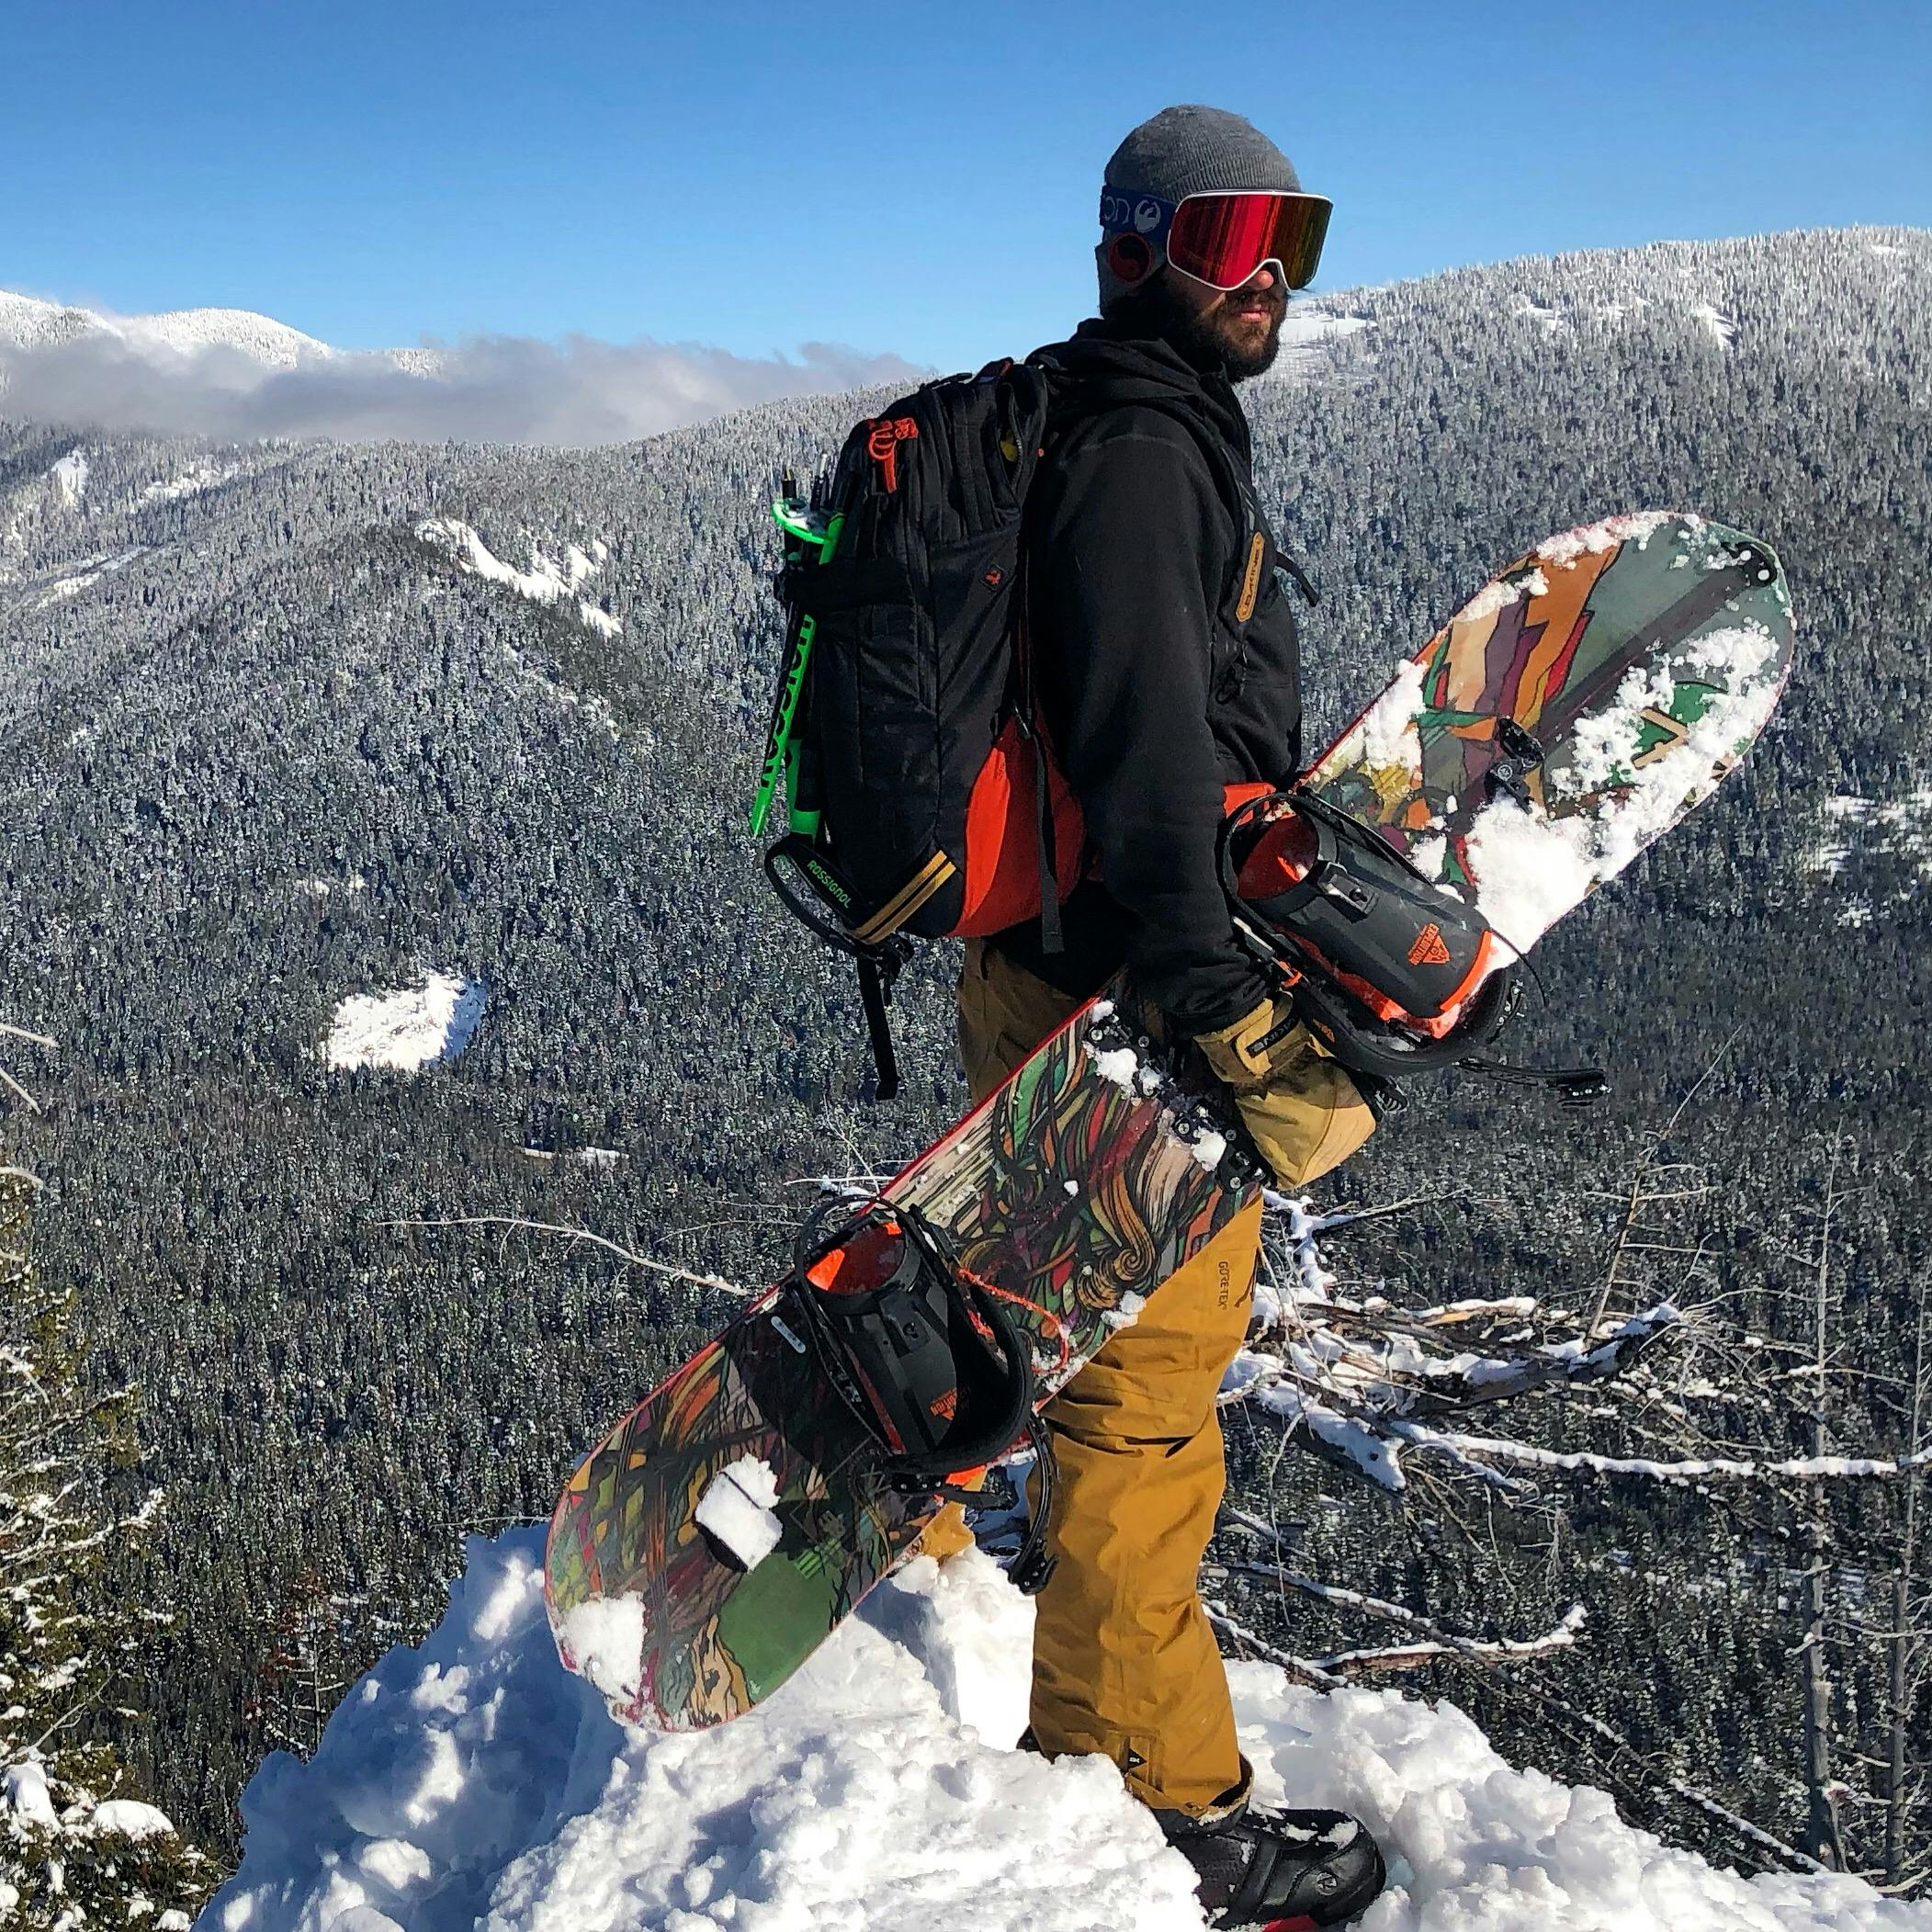 A snowboarder standing at the top of a snowy mountain.